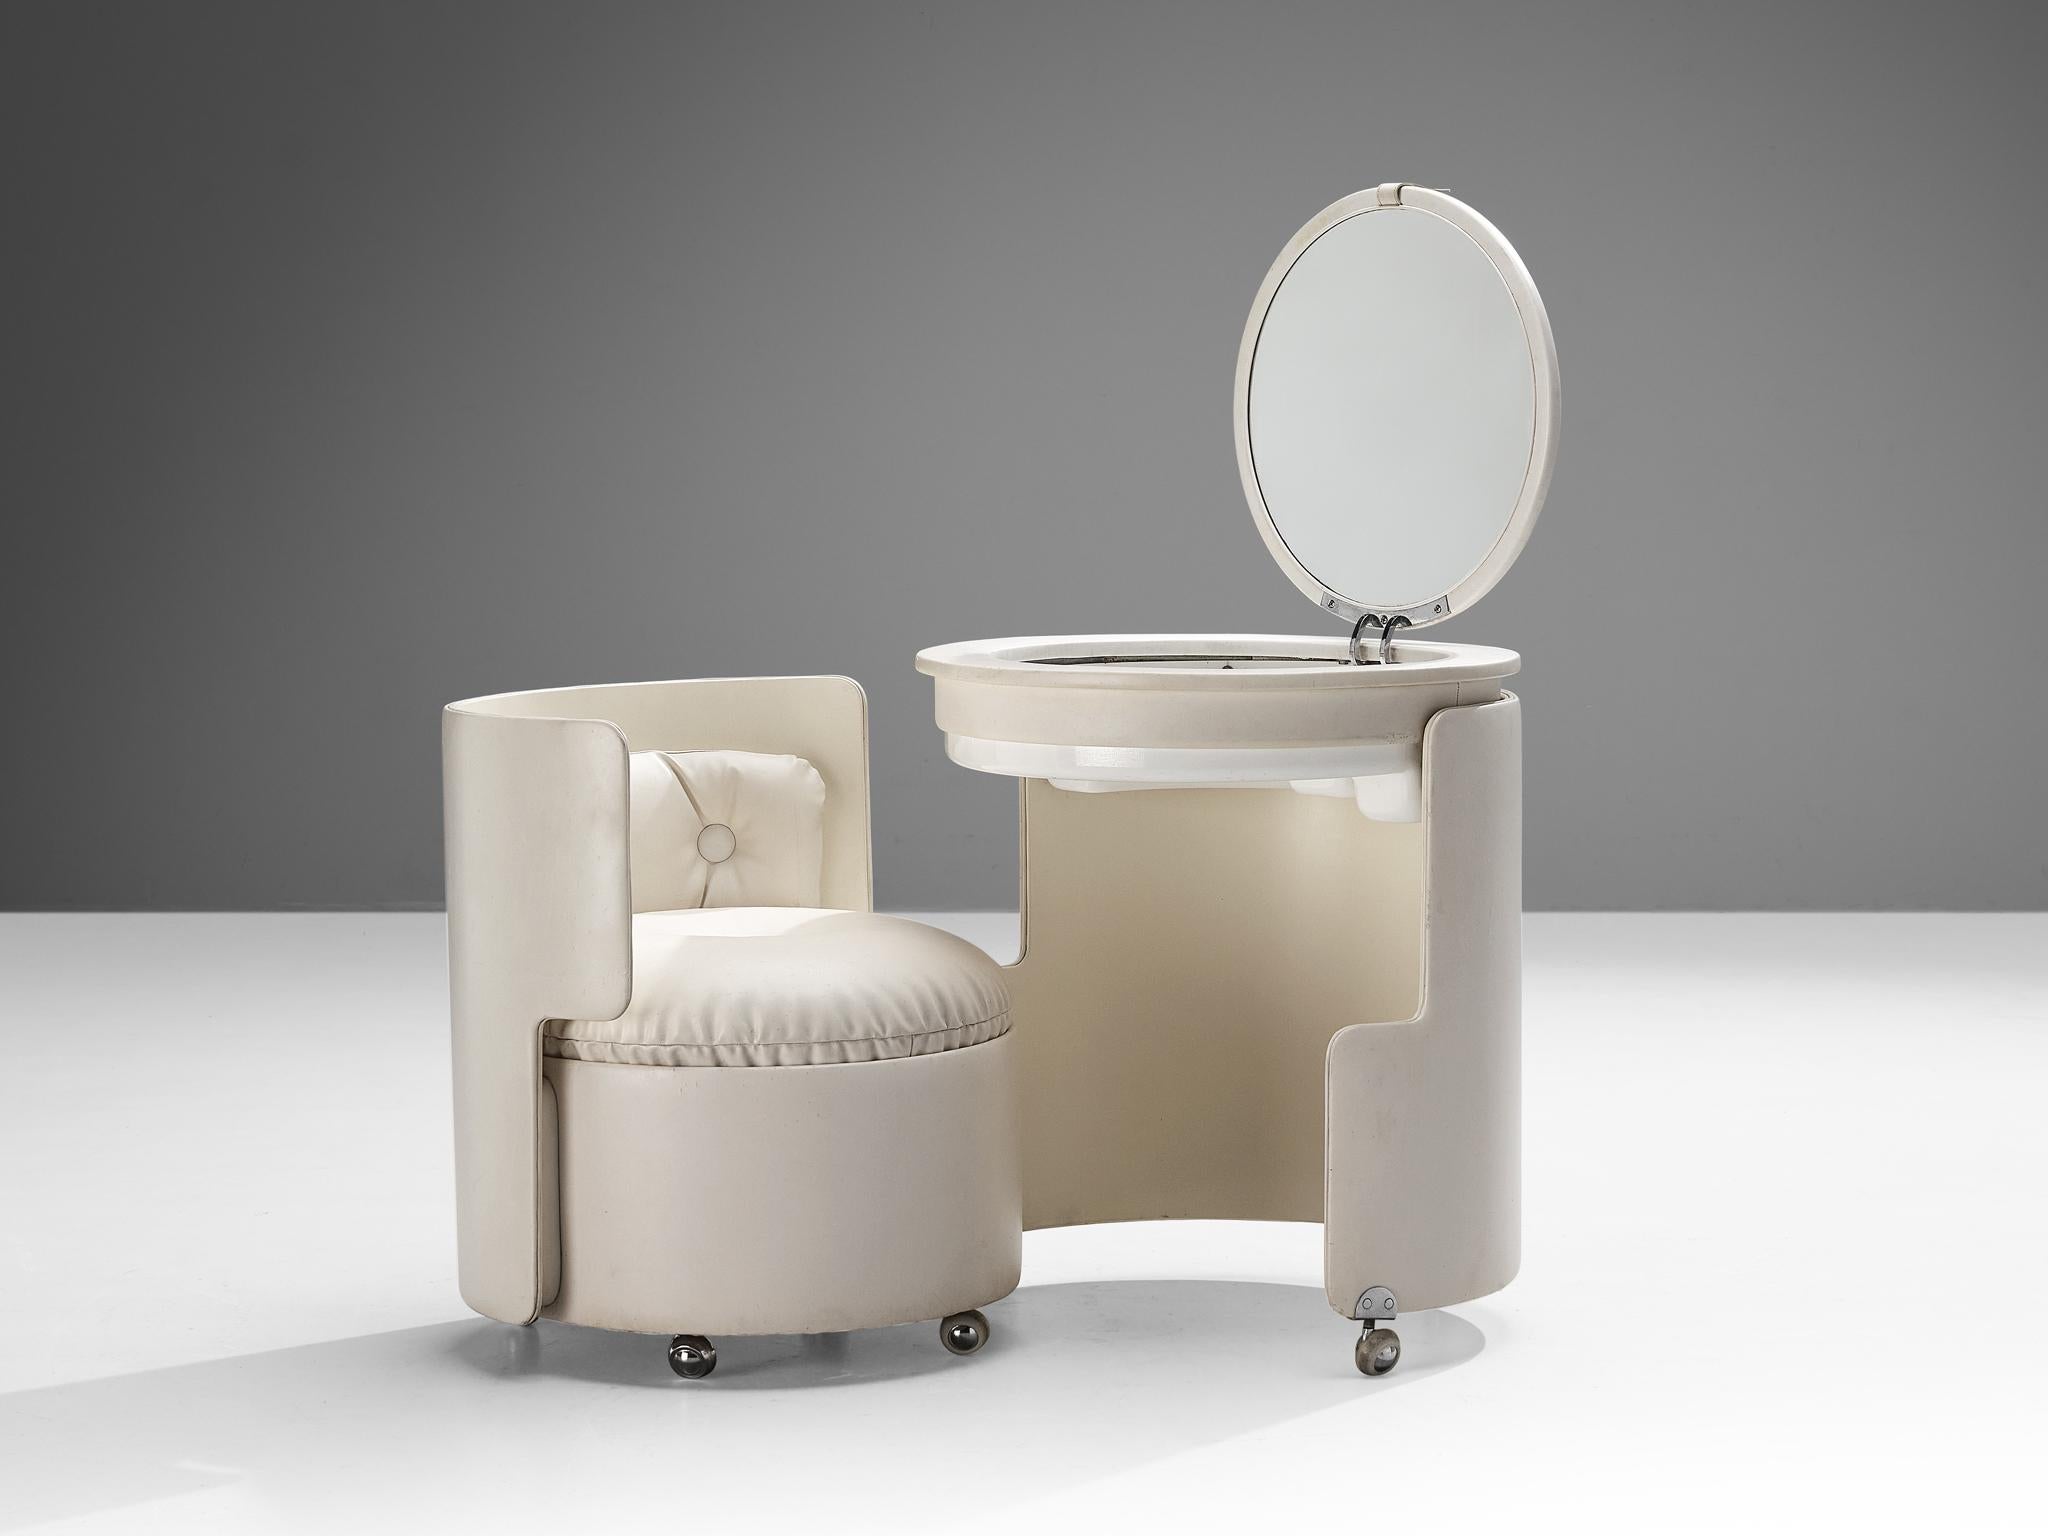 Luigi Massoni for Poltrona Frau, ‘Dilly Dally’ vanity set, steel, mirror, leatherette, fiberglass, Italy, design 1968

Outstanding Italian dressing table designed by Luigi Massoni in a functional way. Both the table and the chair are equipped with